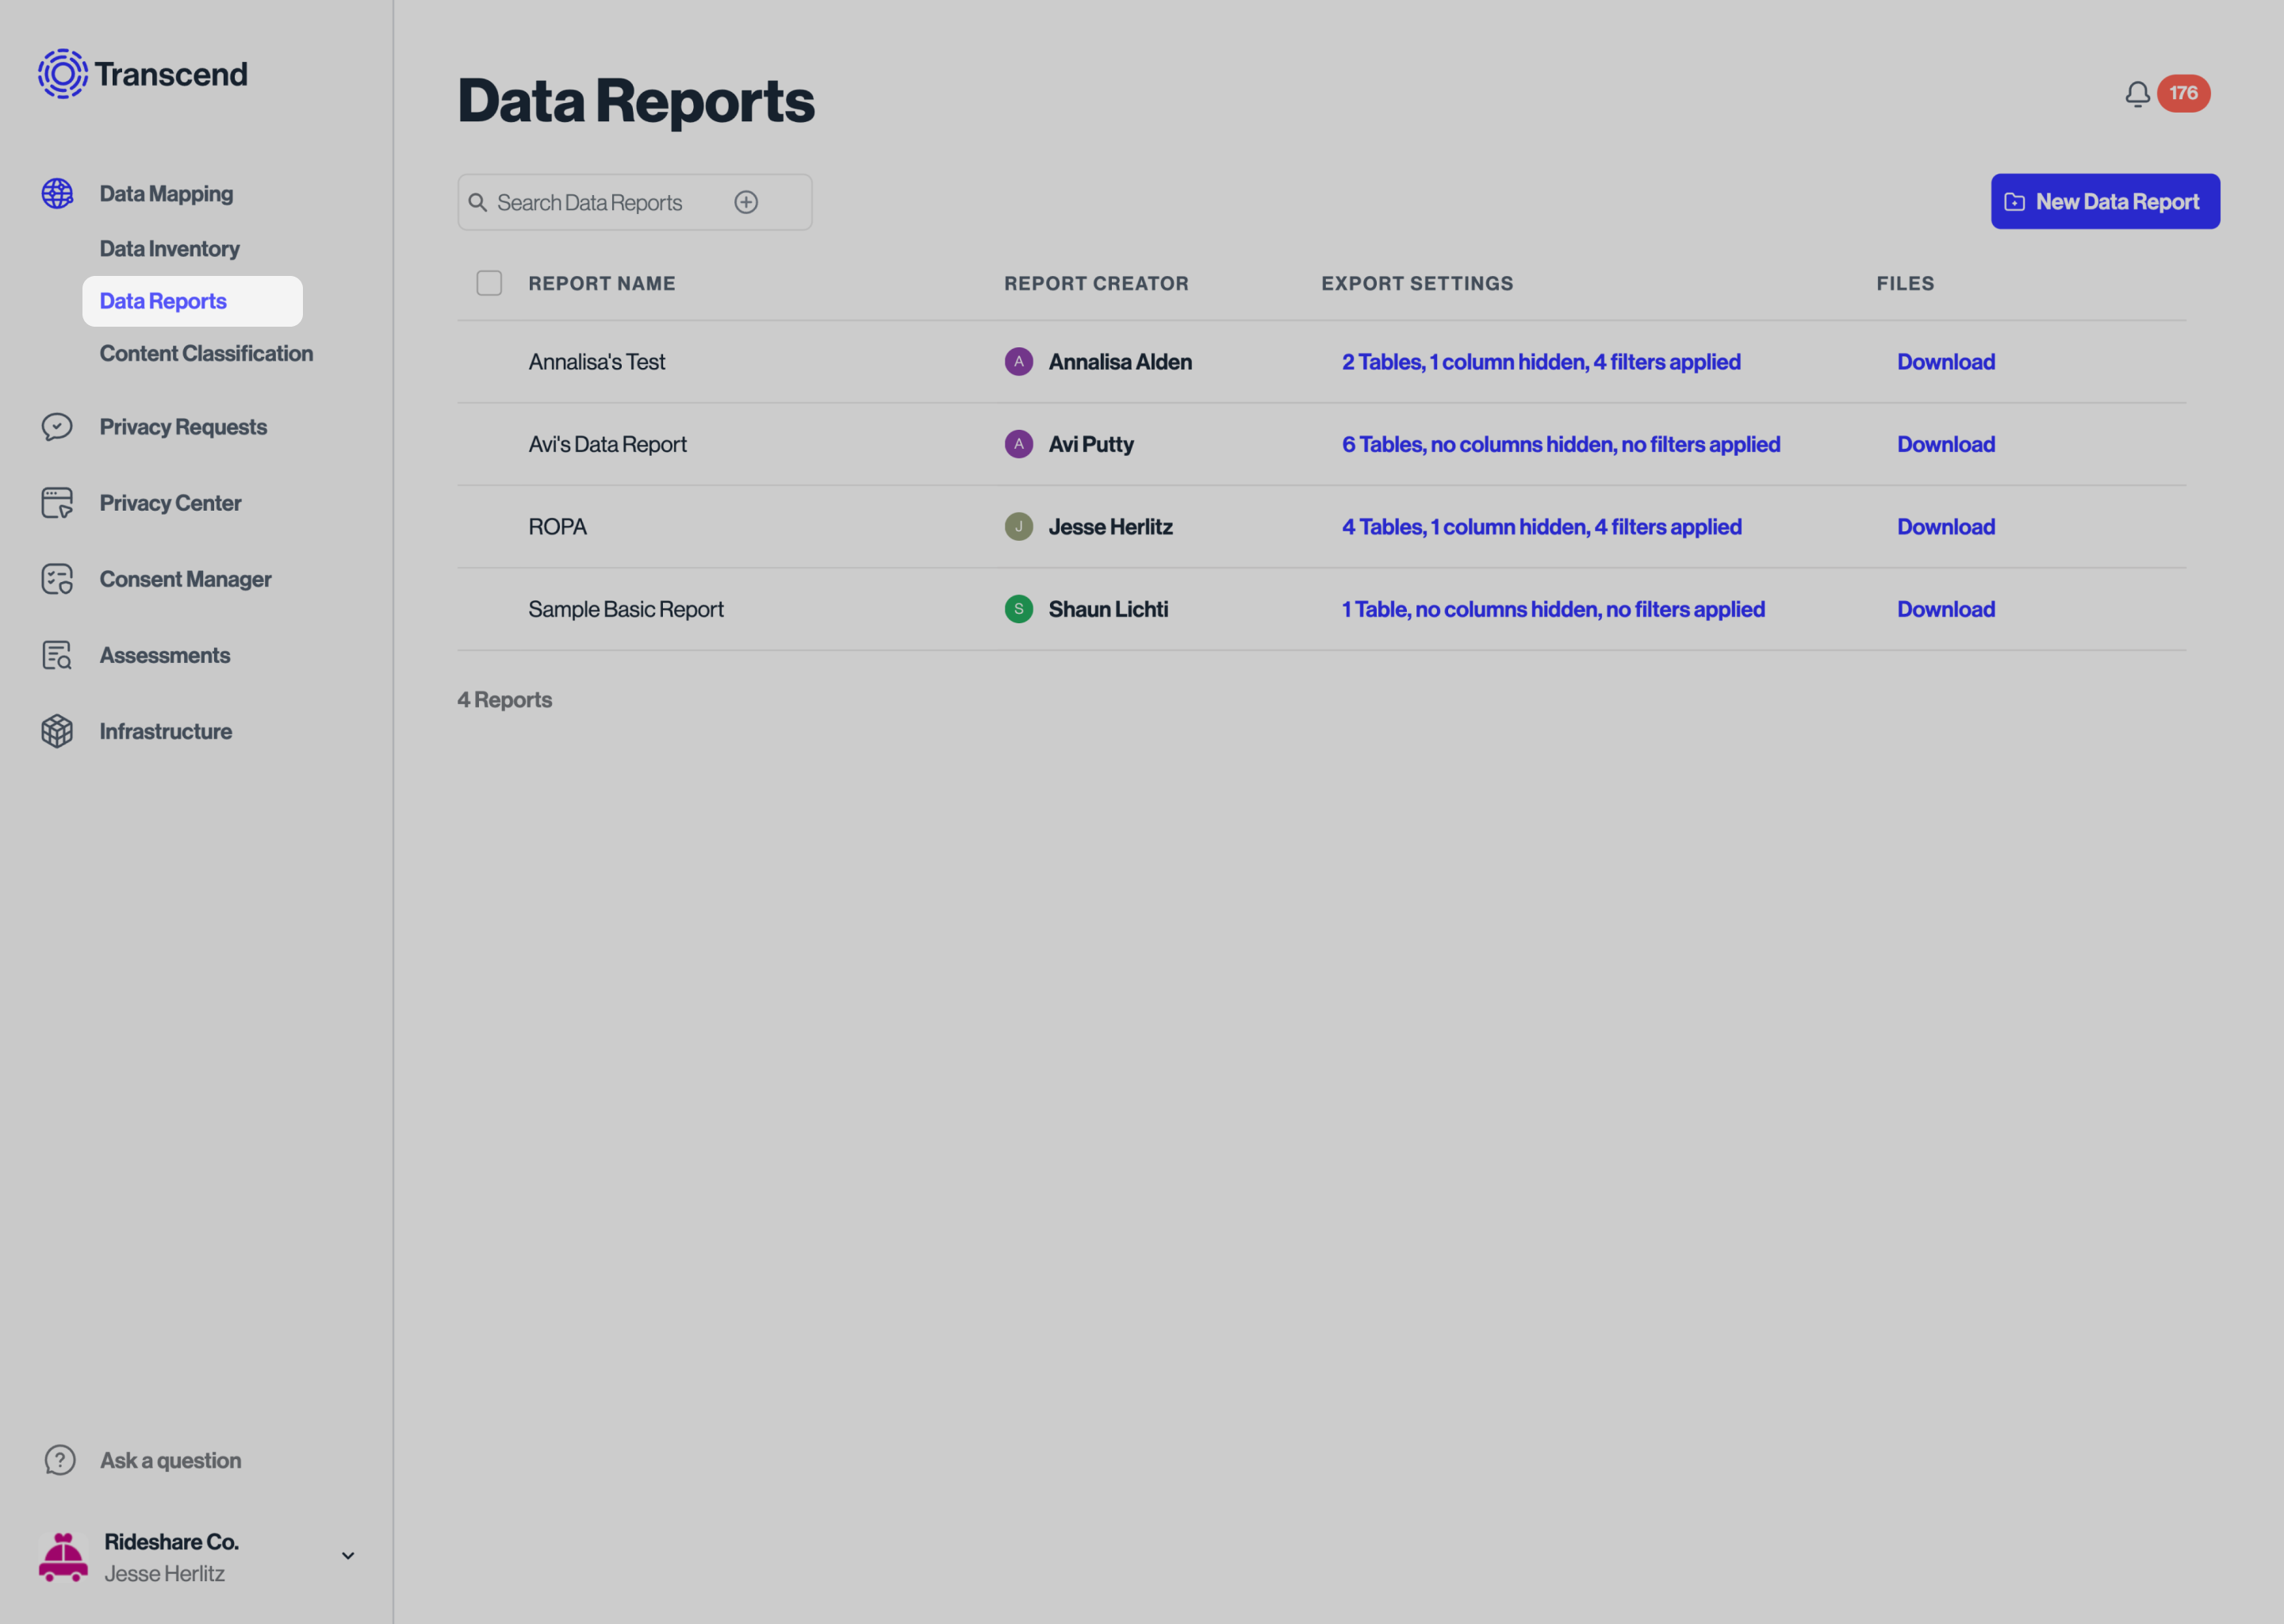 How to find the Data Reports feature